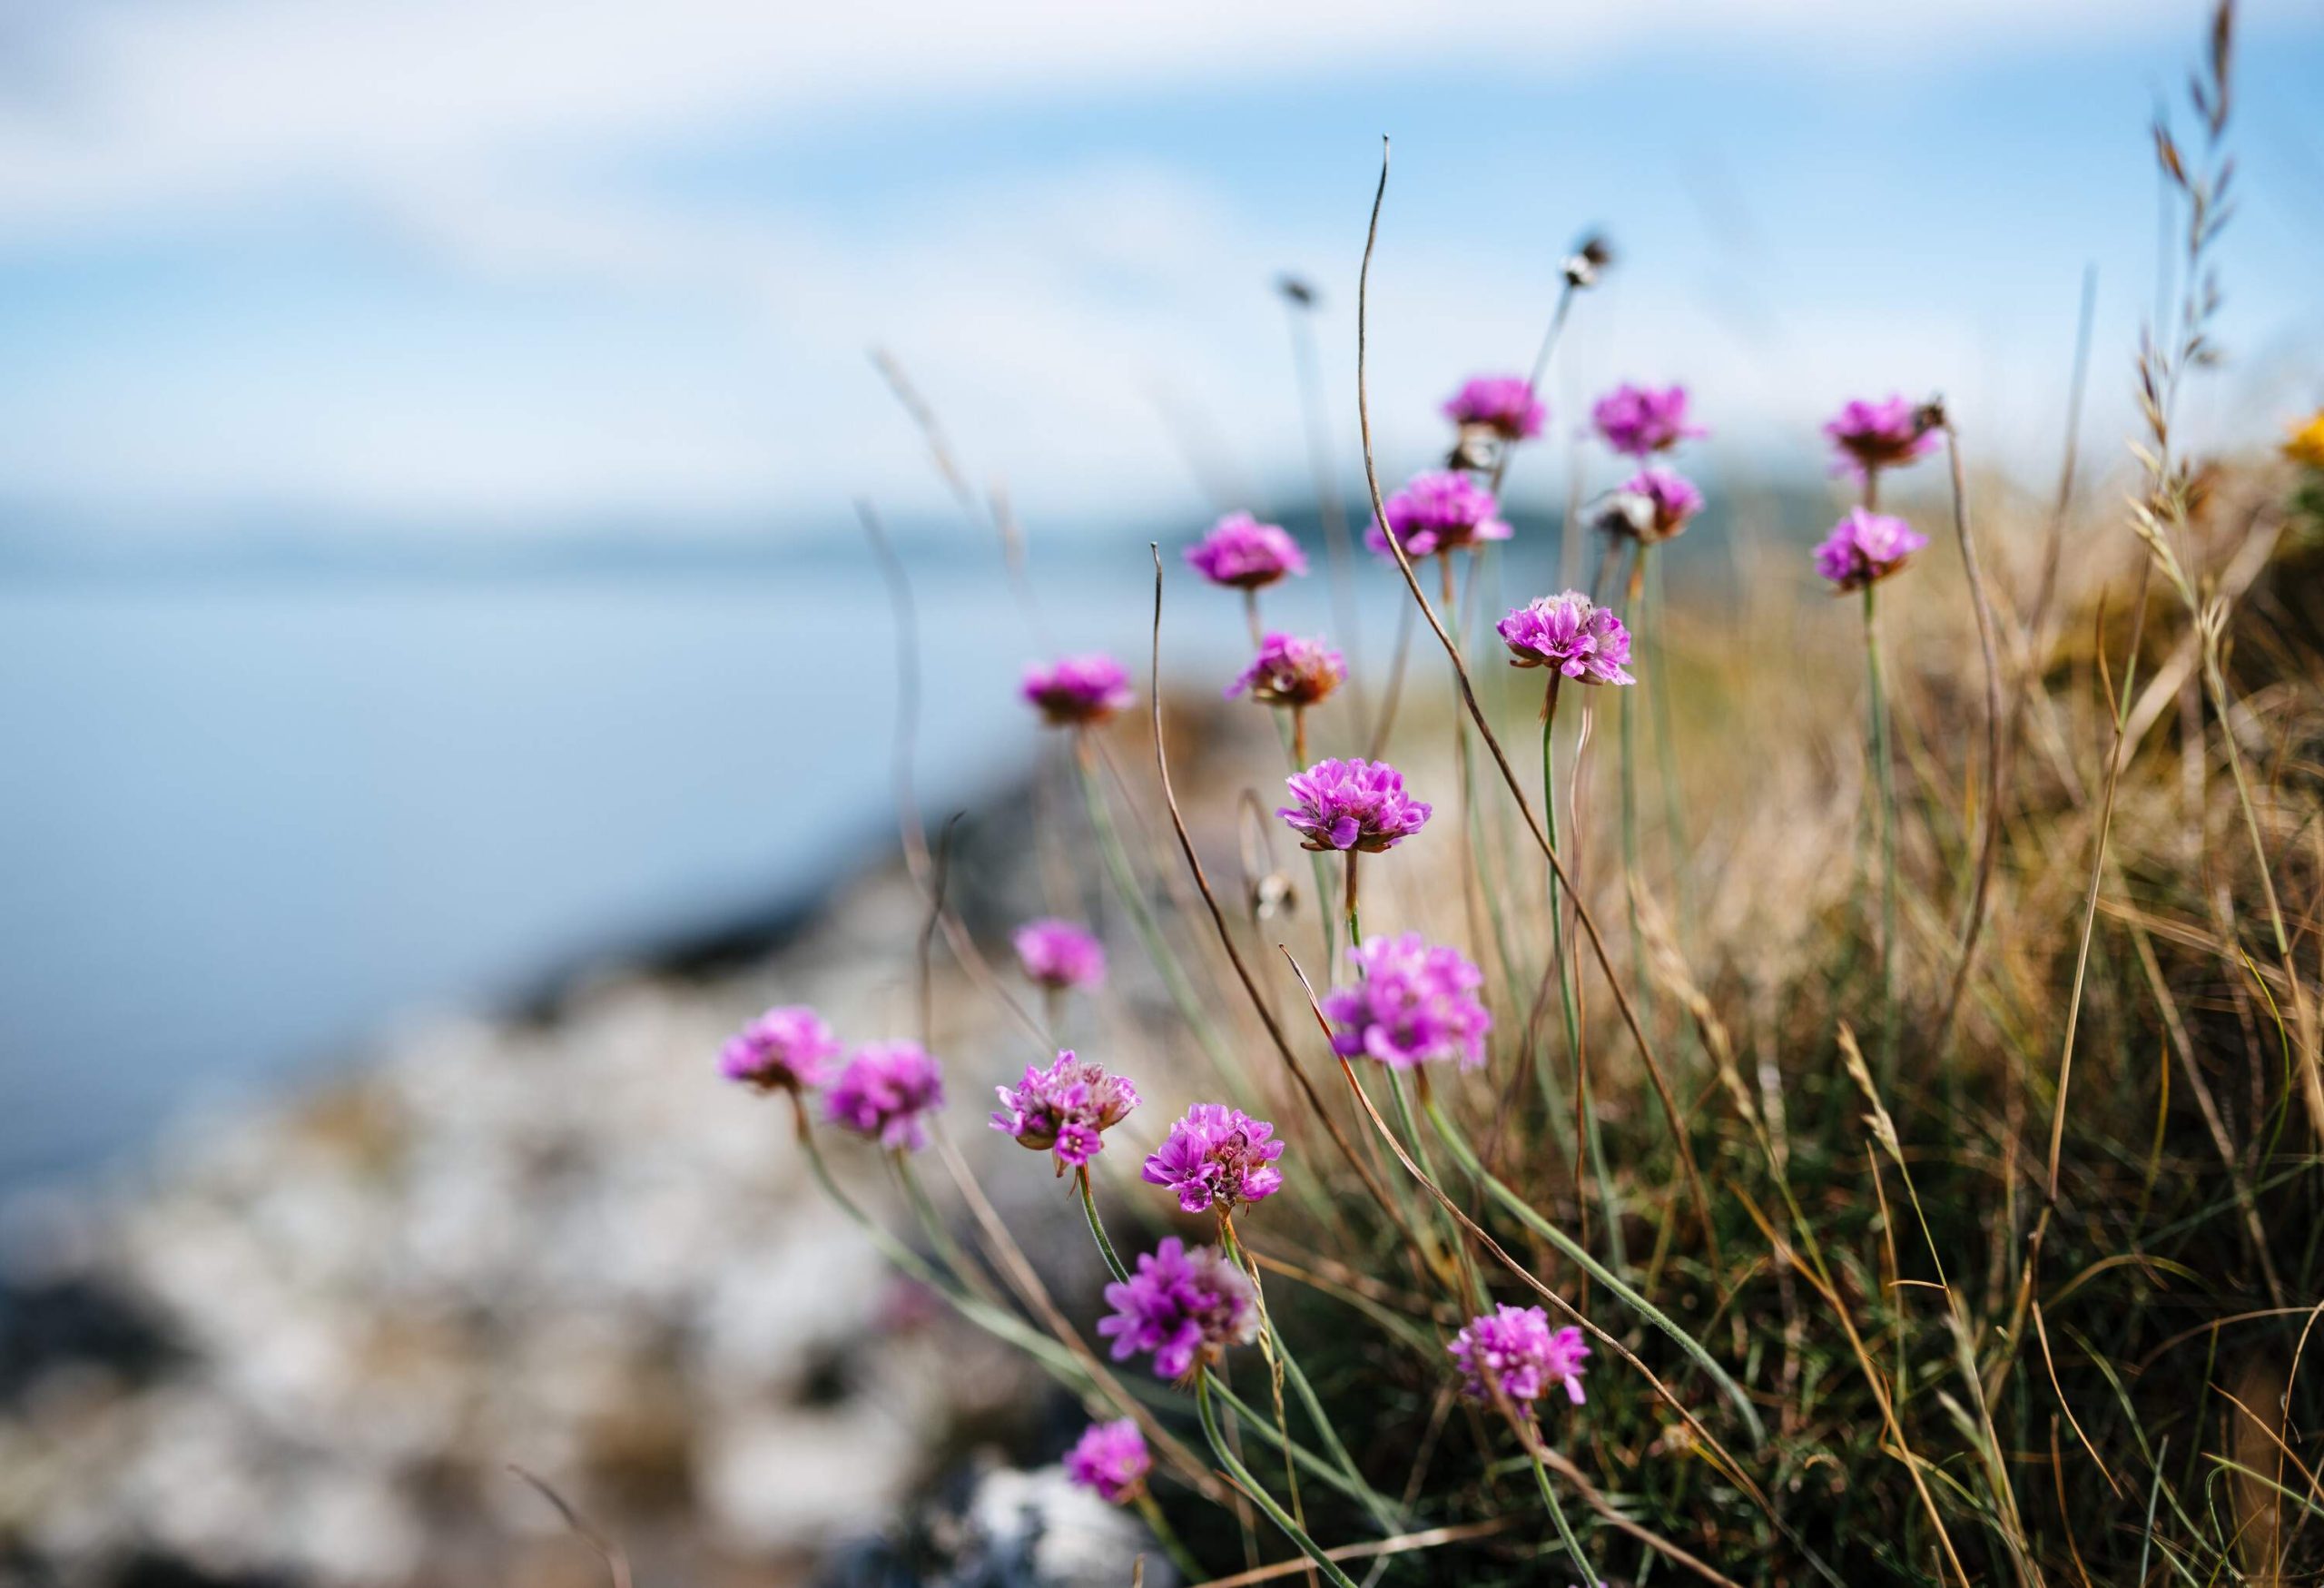 A few flowers in front of the ardmucknish bay around Oban.